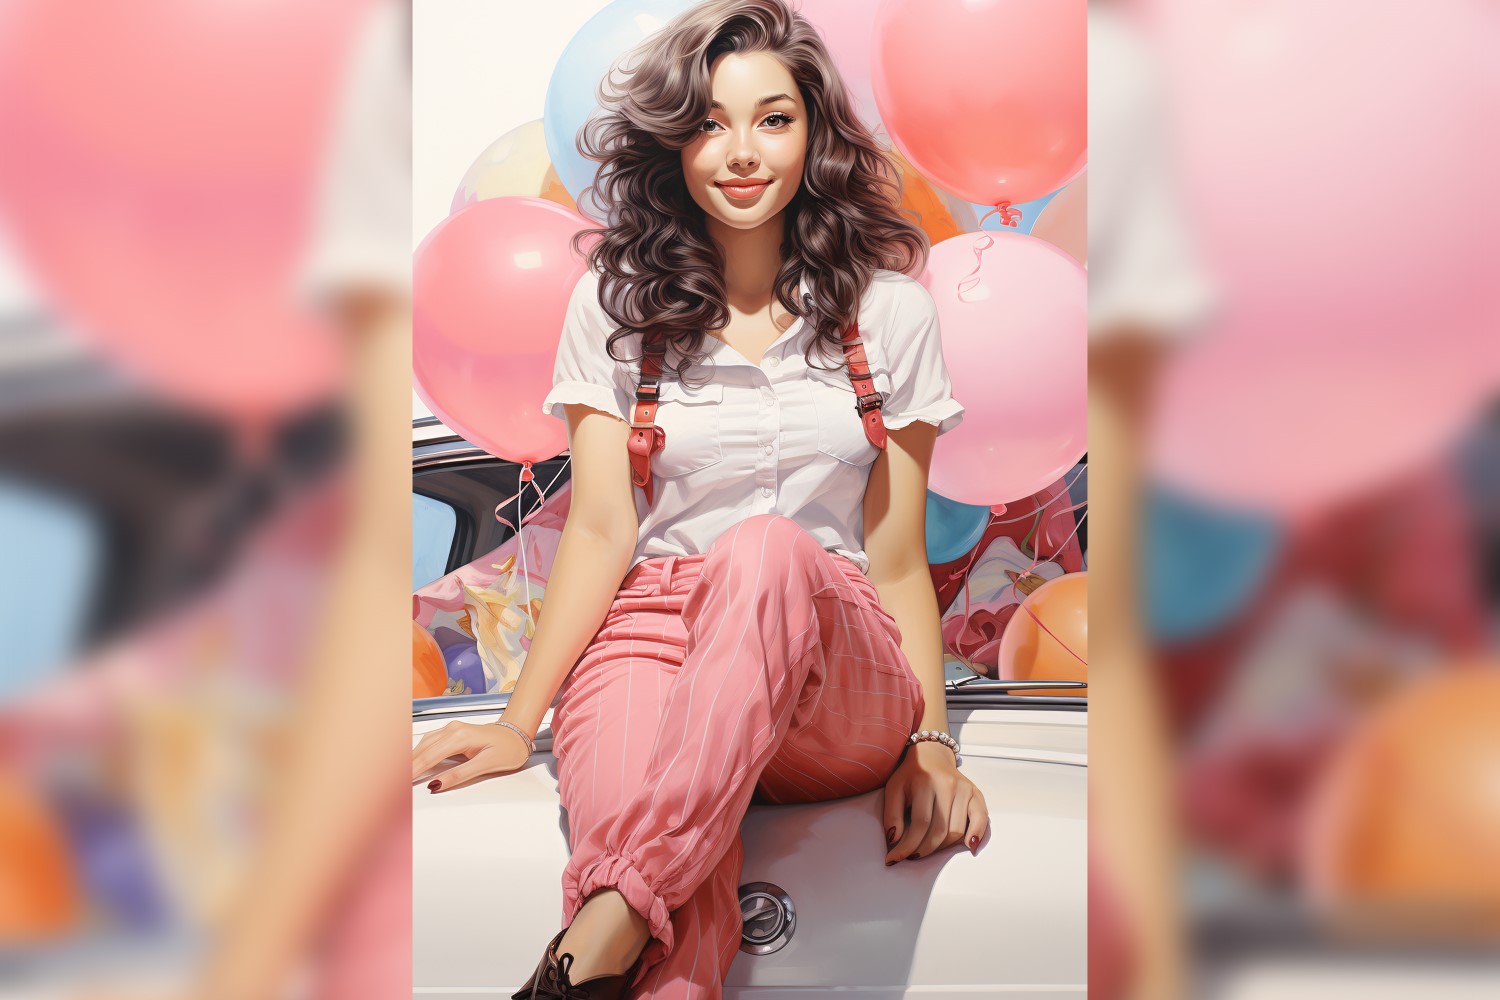 Girl on Pink Retro car with Pink Balloon Celebrating Valentine day 18